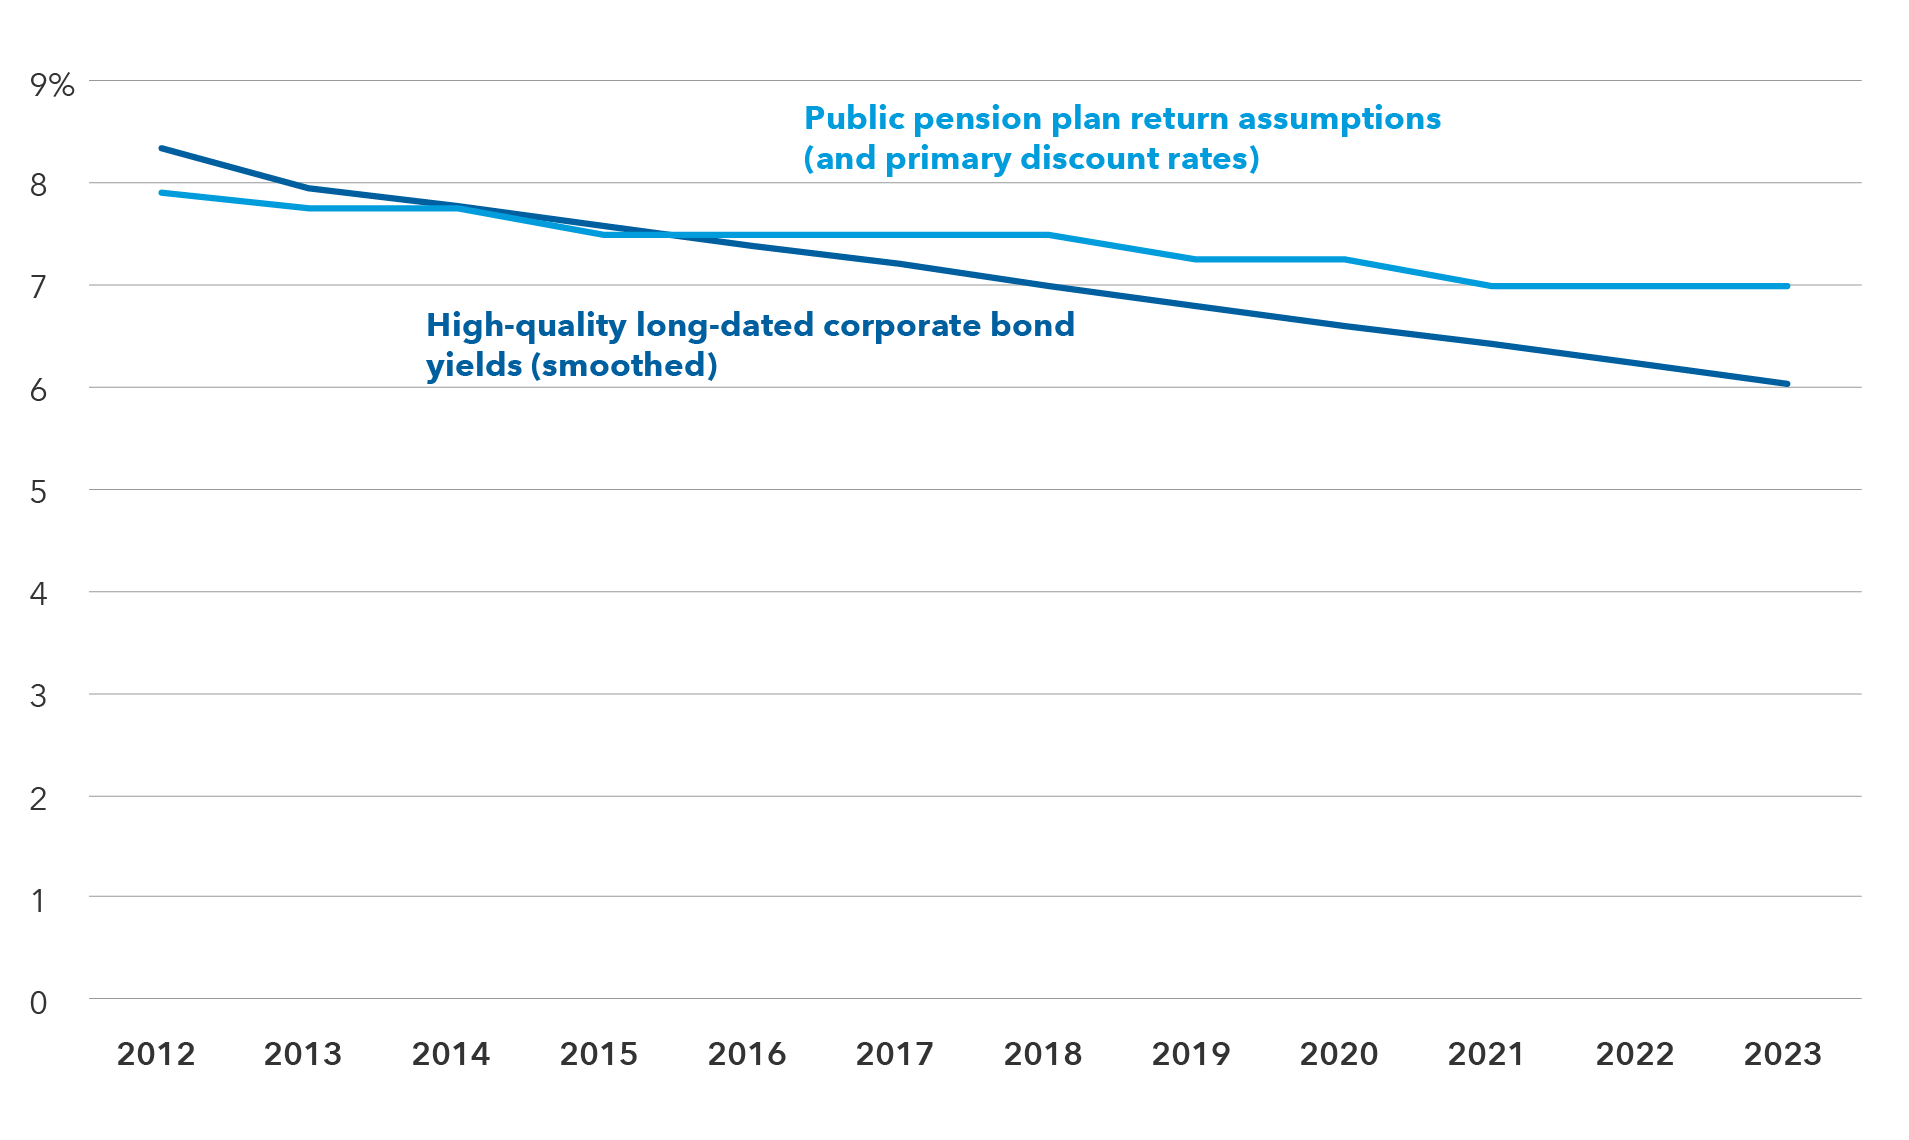 Chart compares smoothed yields for high-quality long-dated corporate bonds with the median investment return assumption of 131 public pension plans. It shows that the smoothed bond yield fell steadily from 8.4% in plan year 2012 to 6% in plan year 2023. During the same time period, the median pension plan return assumption showed a less-pronounced decline from 7.9% to 7%. While the return assumption followed the bond yield proxy lower, the gap between the two was largest in 2023, with the return assumption 96 basis points higher than the bond yield. As of March 2023 (NASRA data).